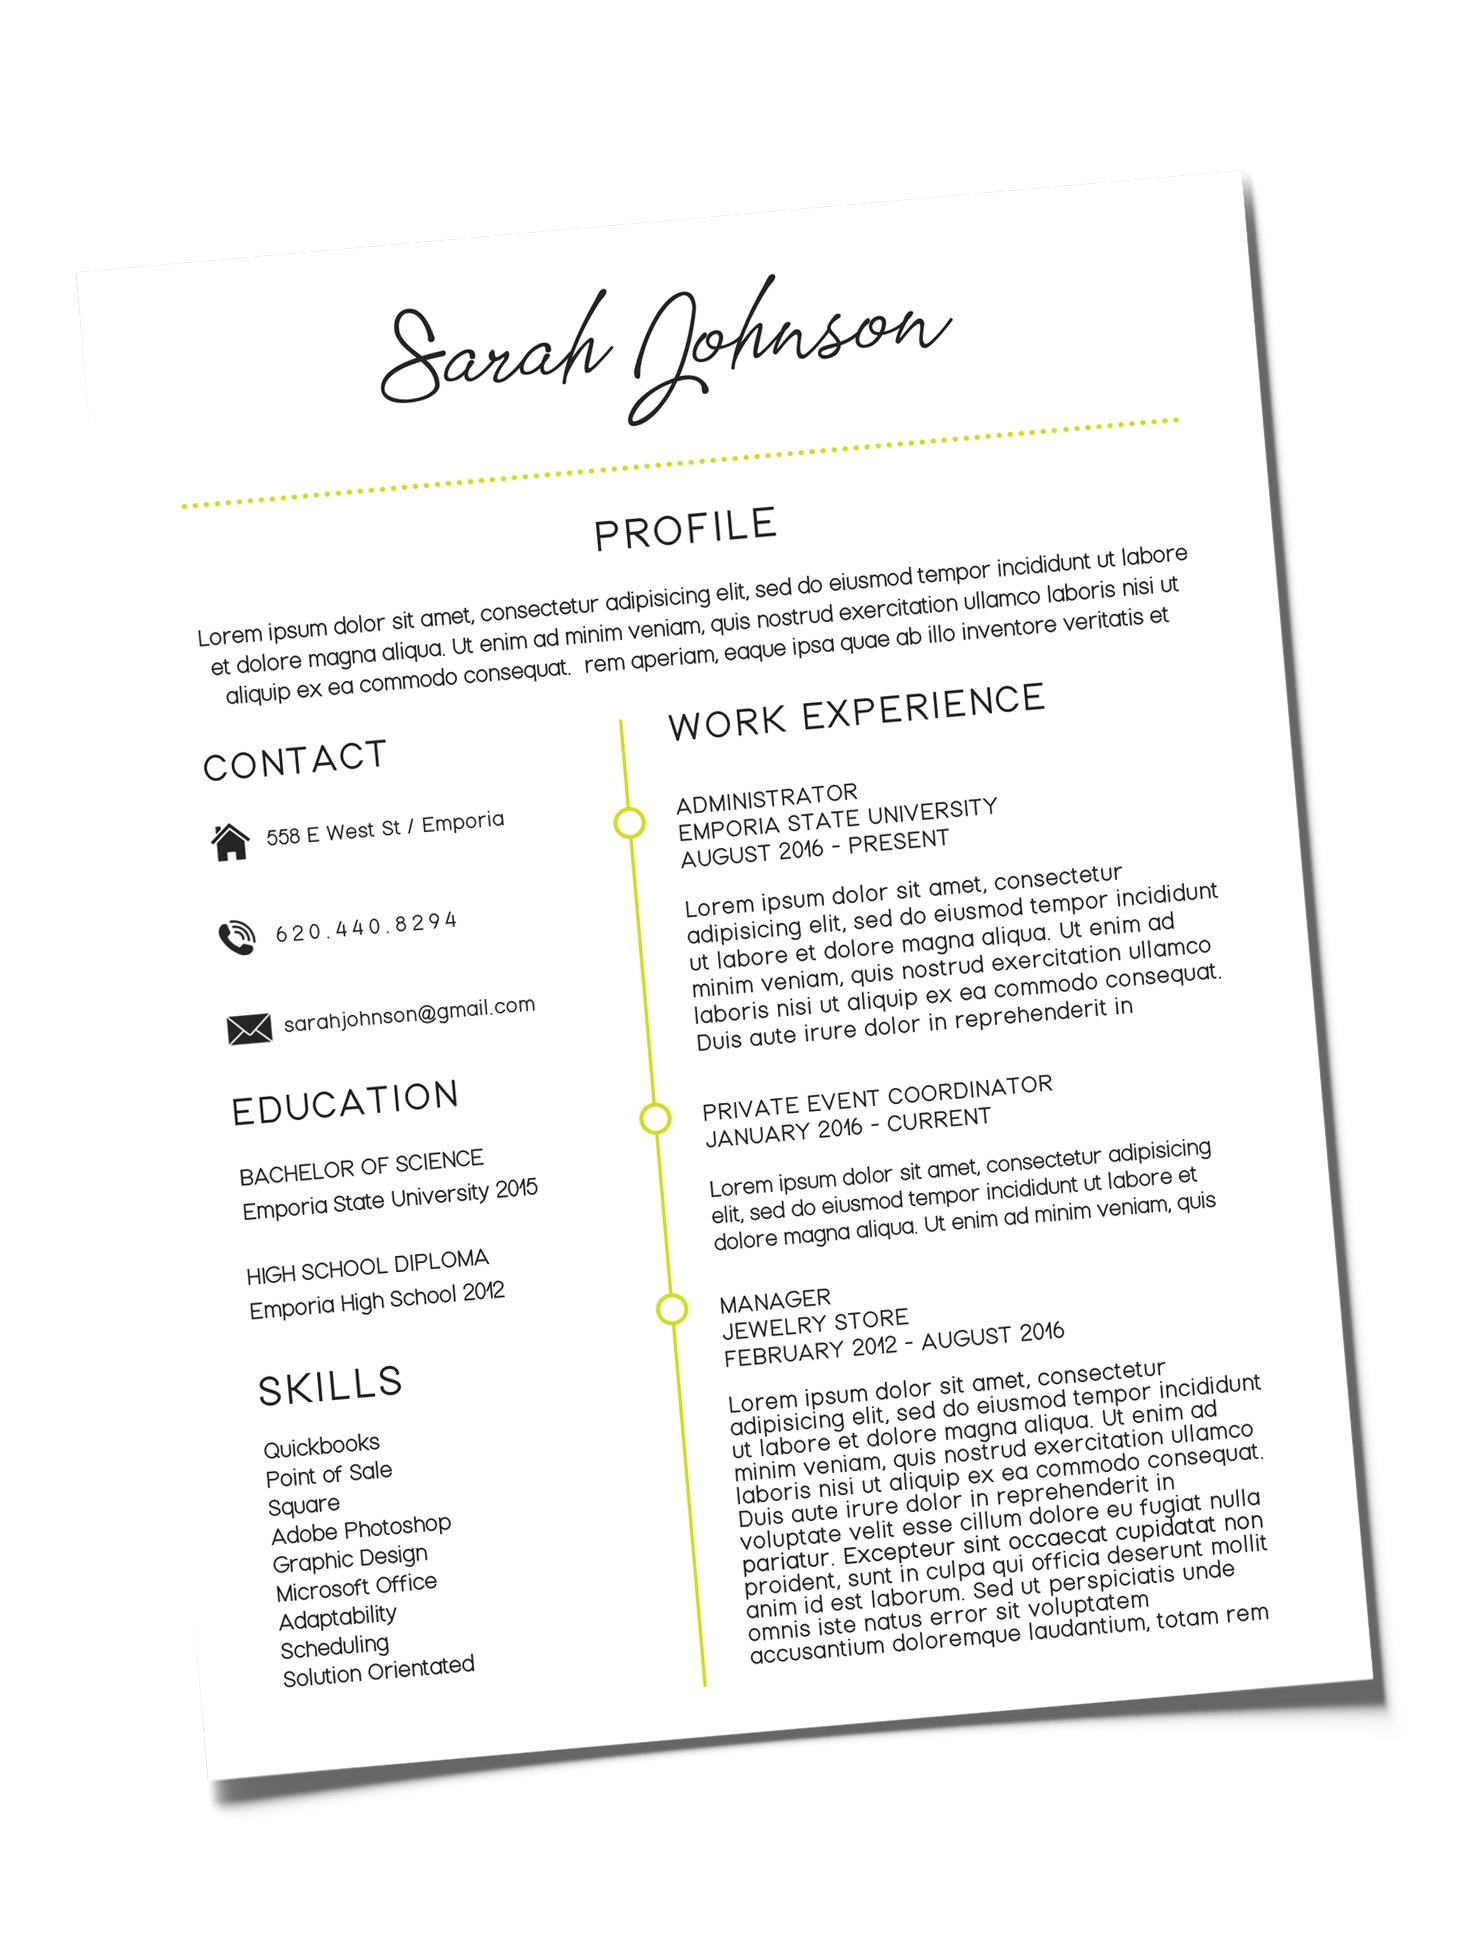 Example of resume printed at University Copy Center